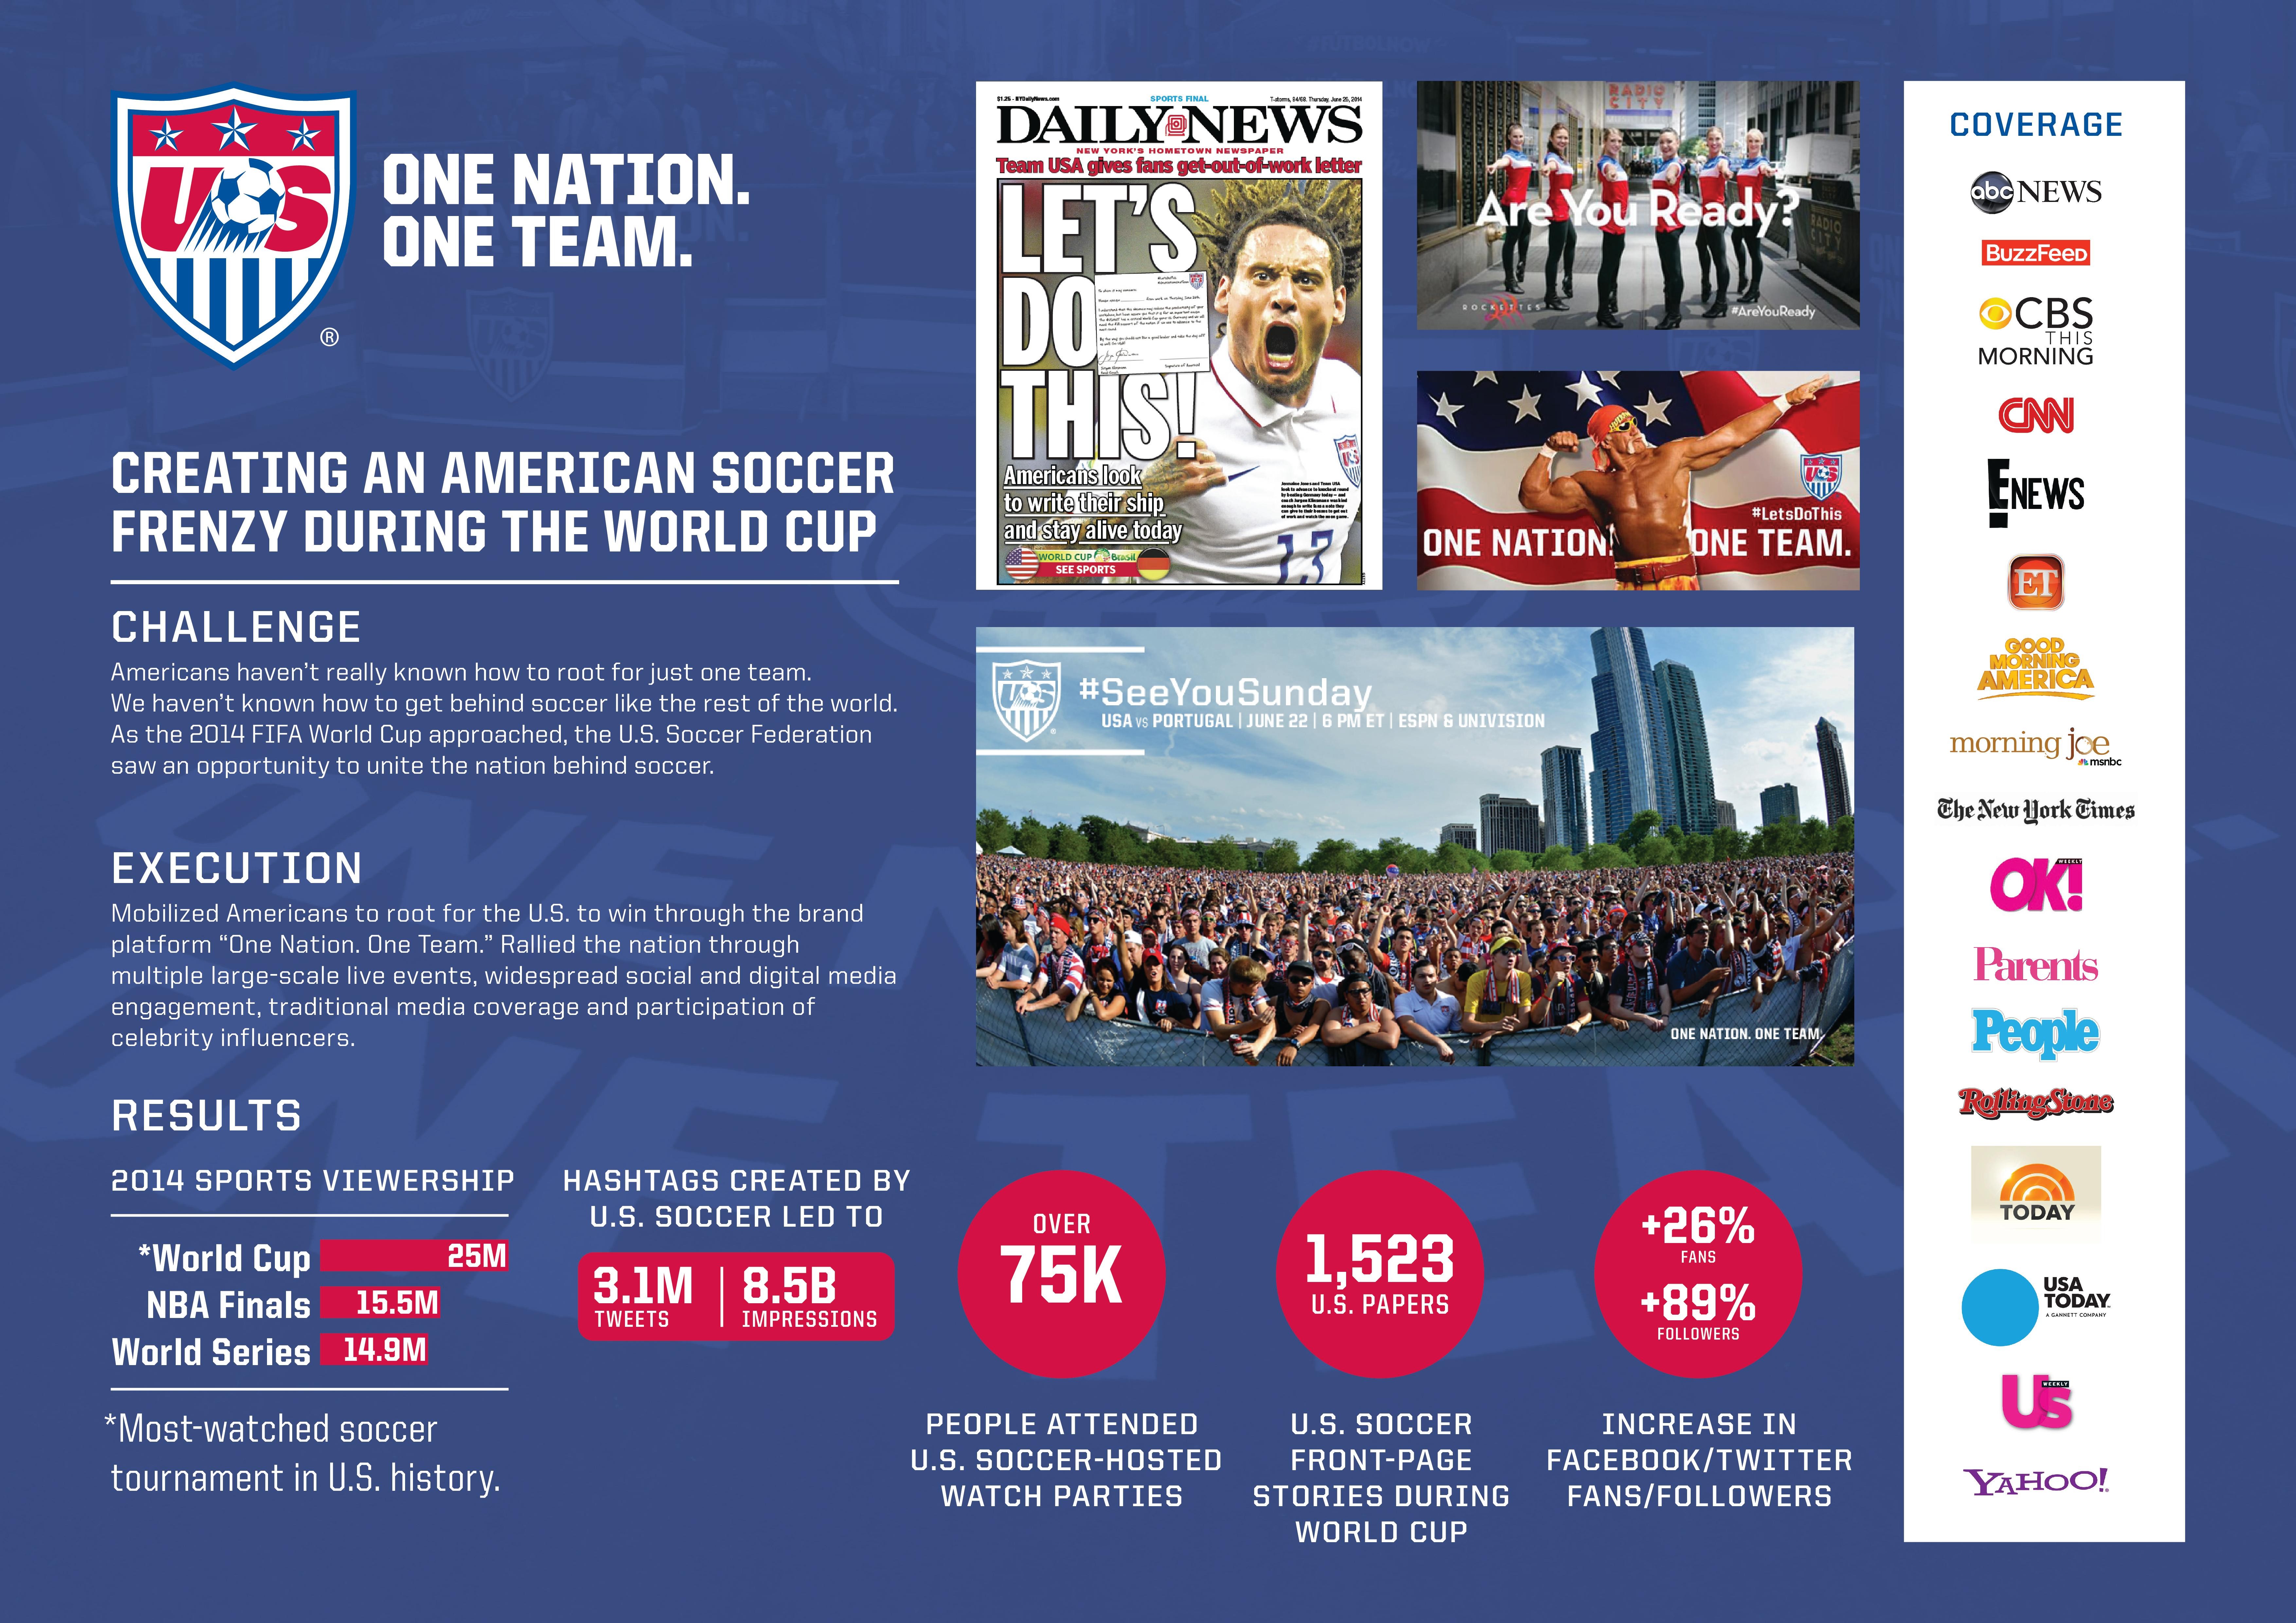 U.S. SOCCER FEDERATION AND FIFA WORLD CUP: “ONE NATION. ONE TEAM.”